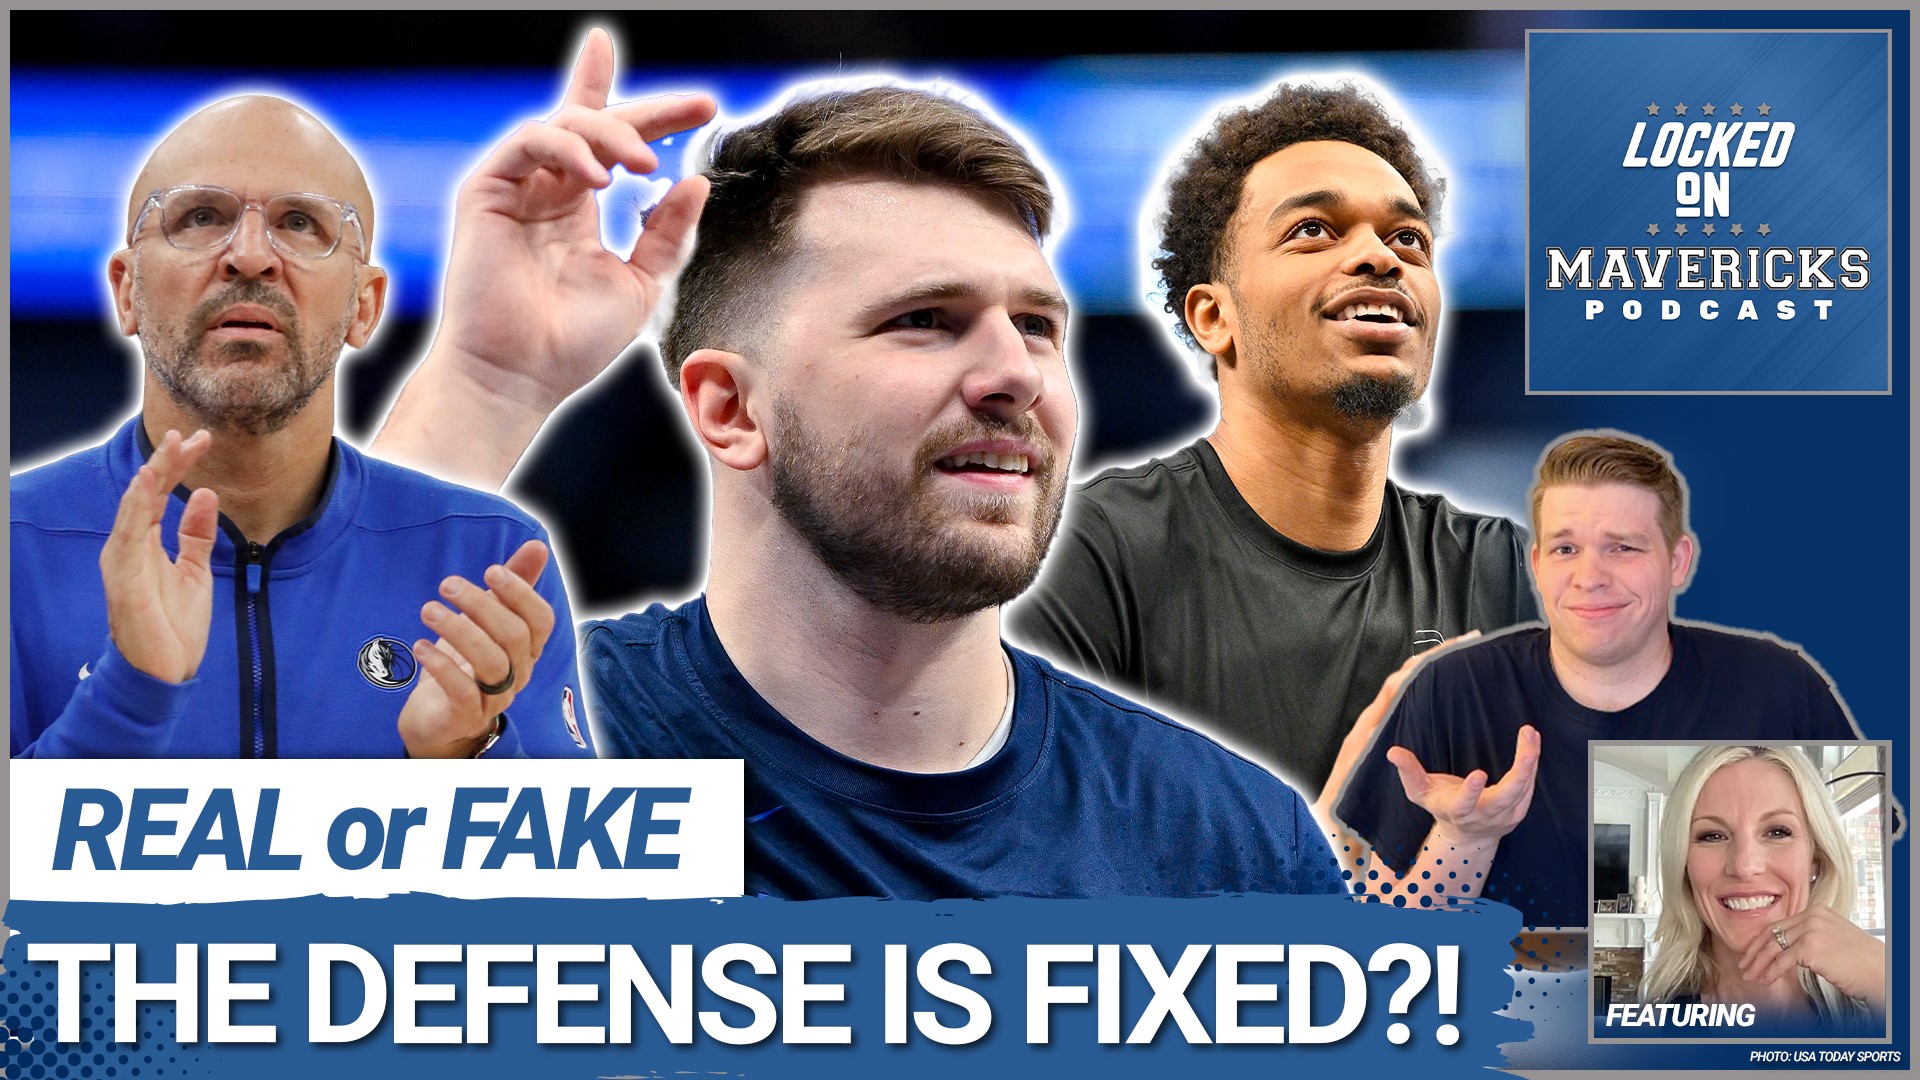 Nick Angstadt & Dana Larson decide what is real or fake about Luka Doncic, Kyrie Irving, Jason Kidd, Dante Exum, and the Dallas Mavericks.